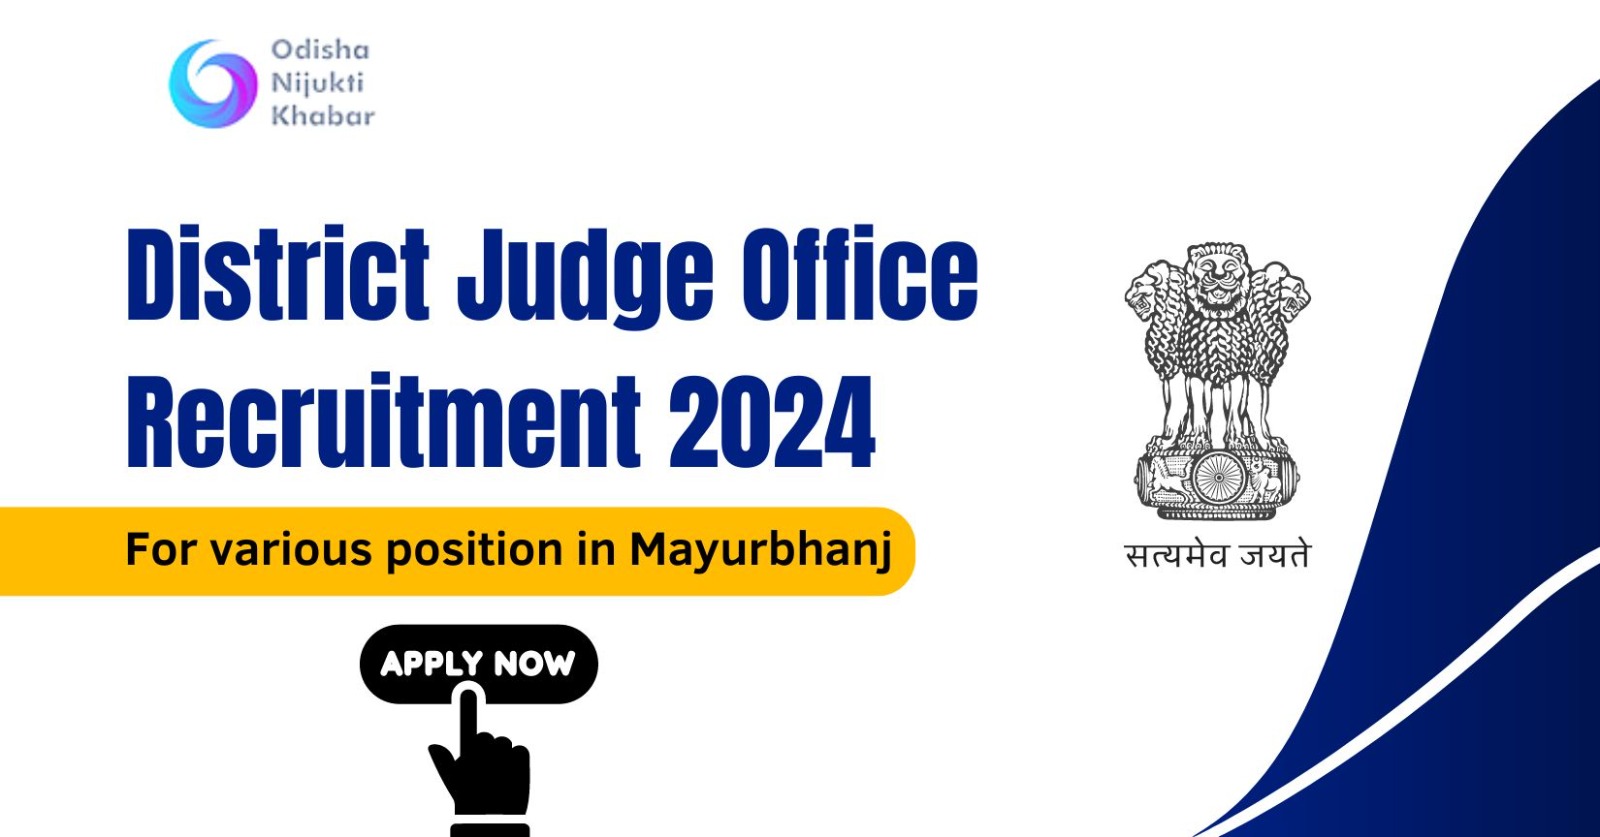 District-Judge-Office-Recruitment-2024-for-various-position-in-Mayurbhanj-Apply-Now